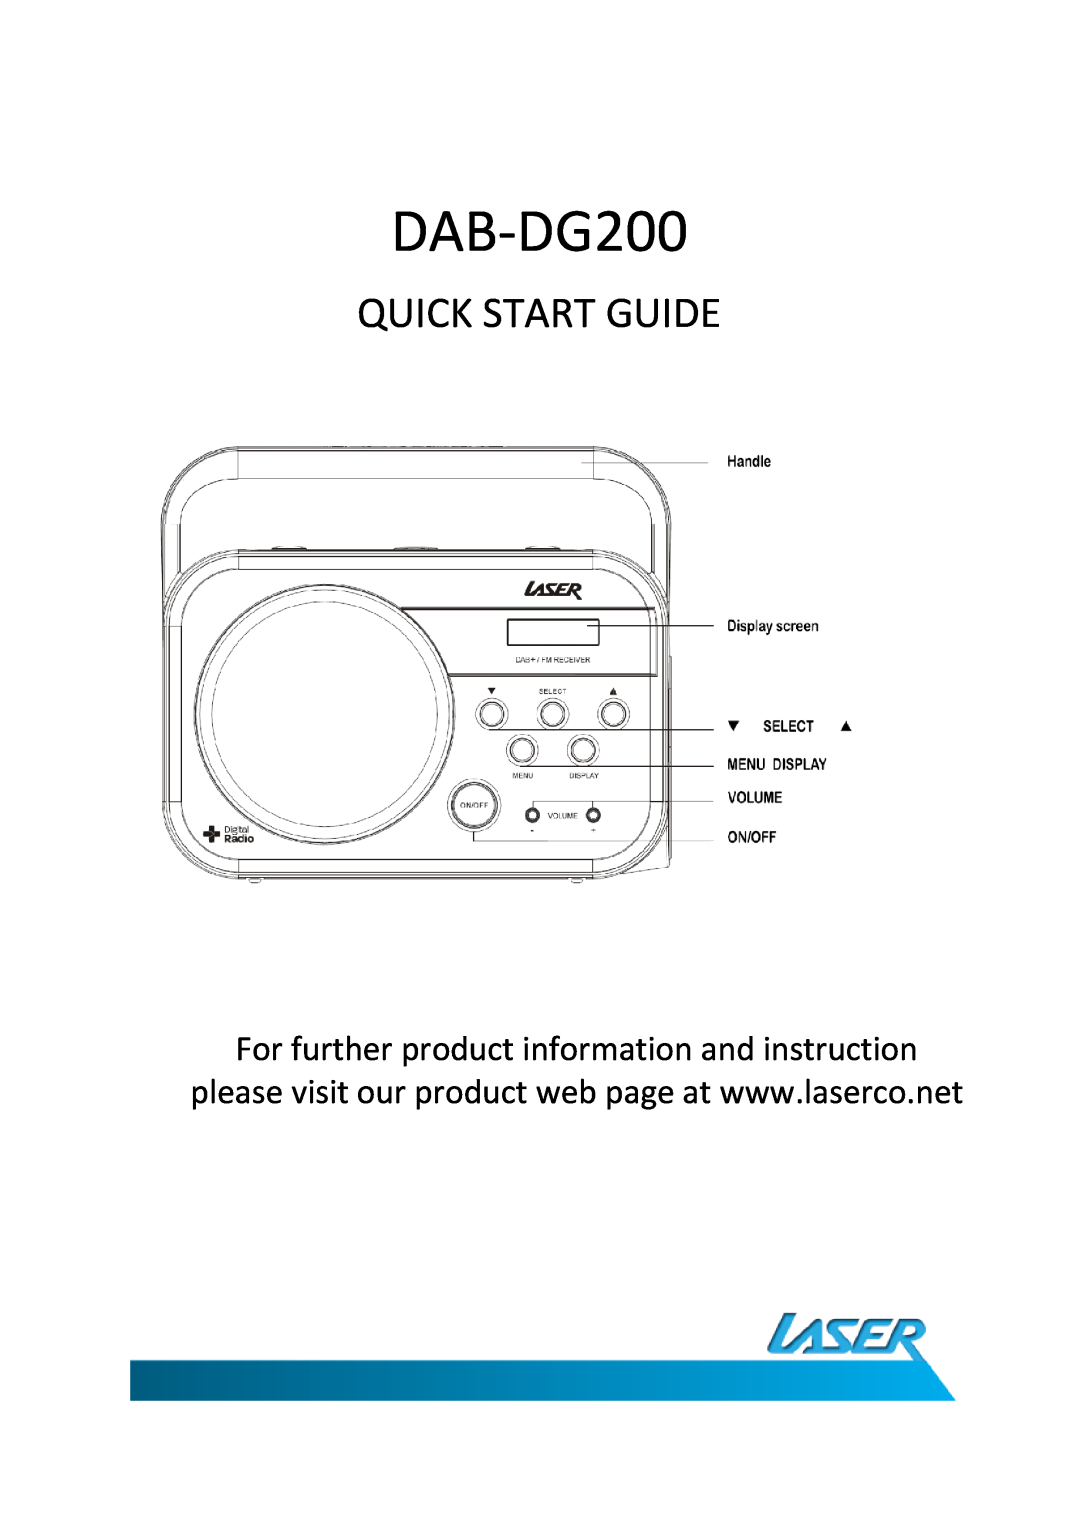 Laser DAB-DG200 quick start Quick Start Guide, For further product information and instruction 